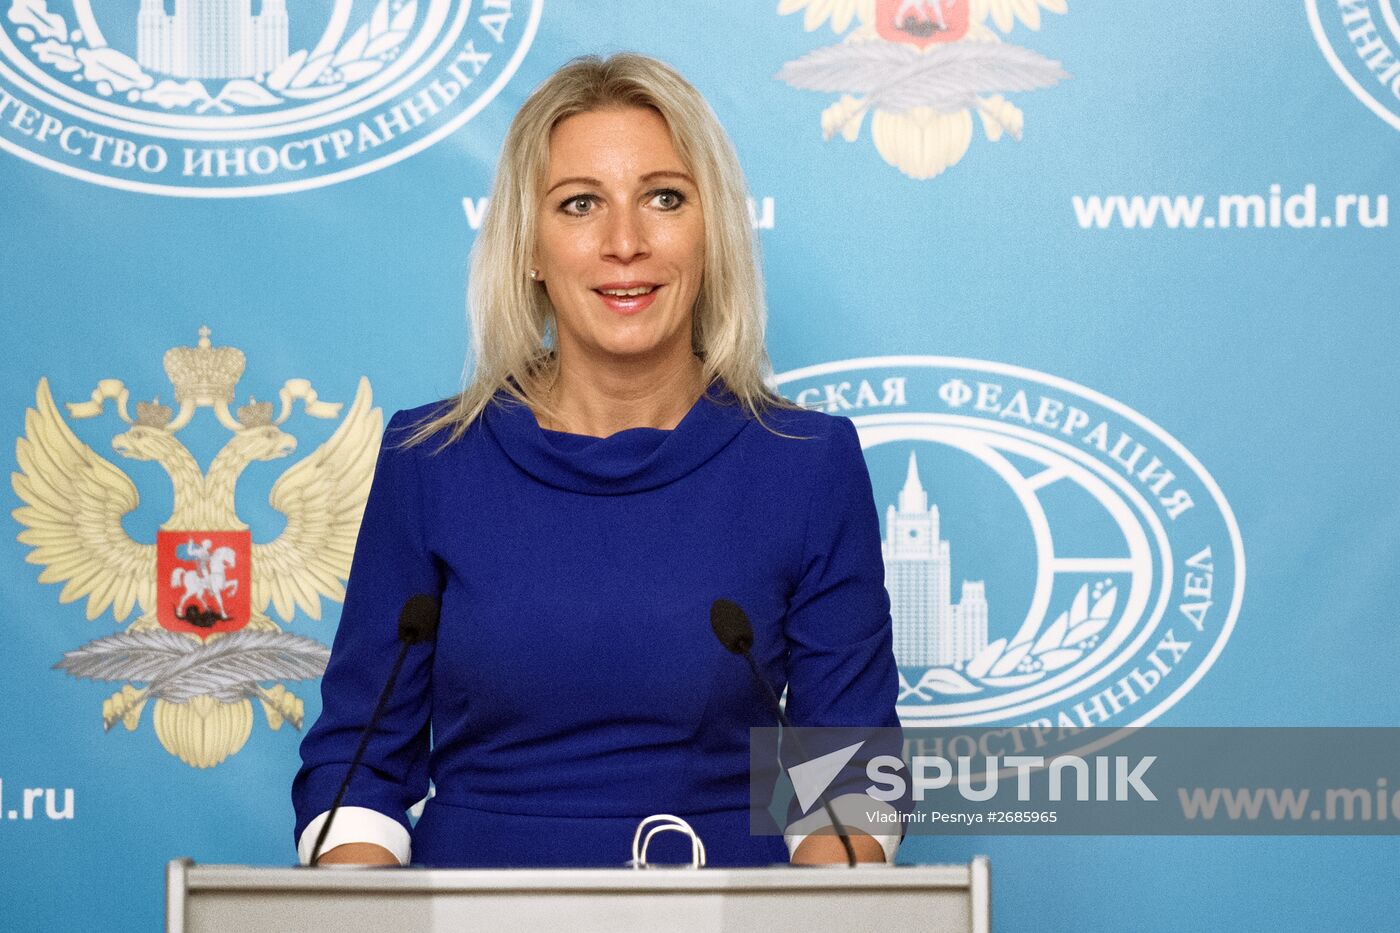 Briefing by Russian Foreign Ministry spokeswoman Maria Zakharova